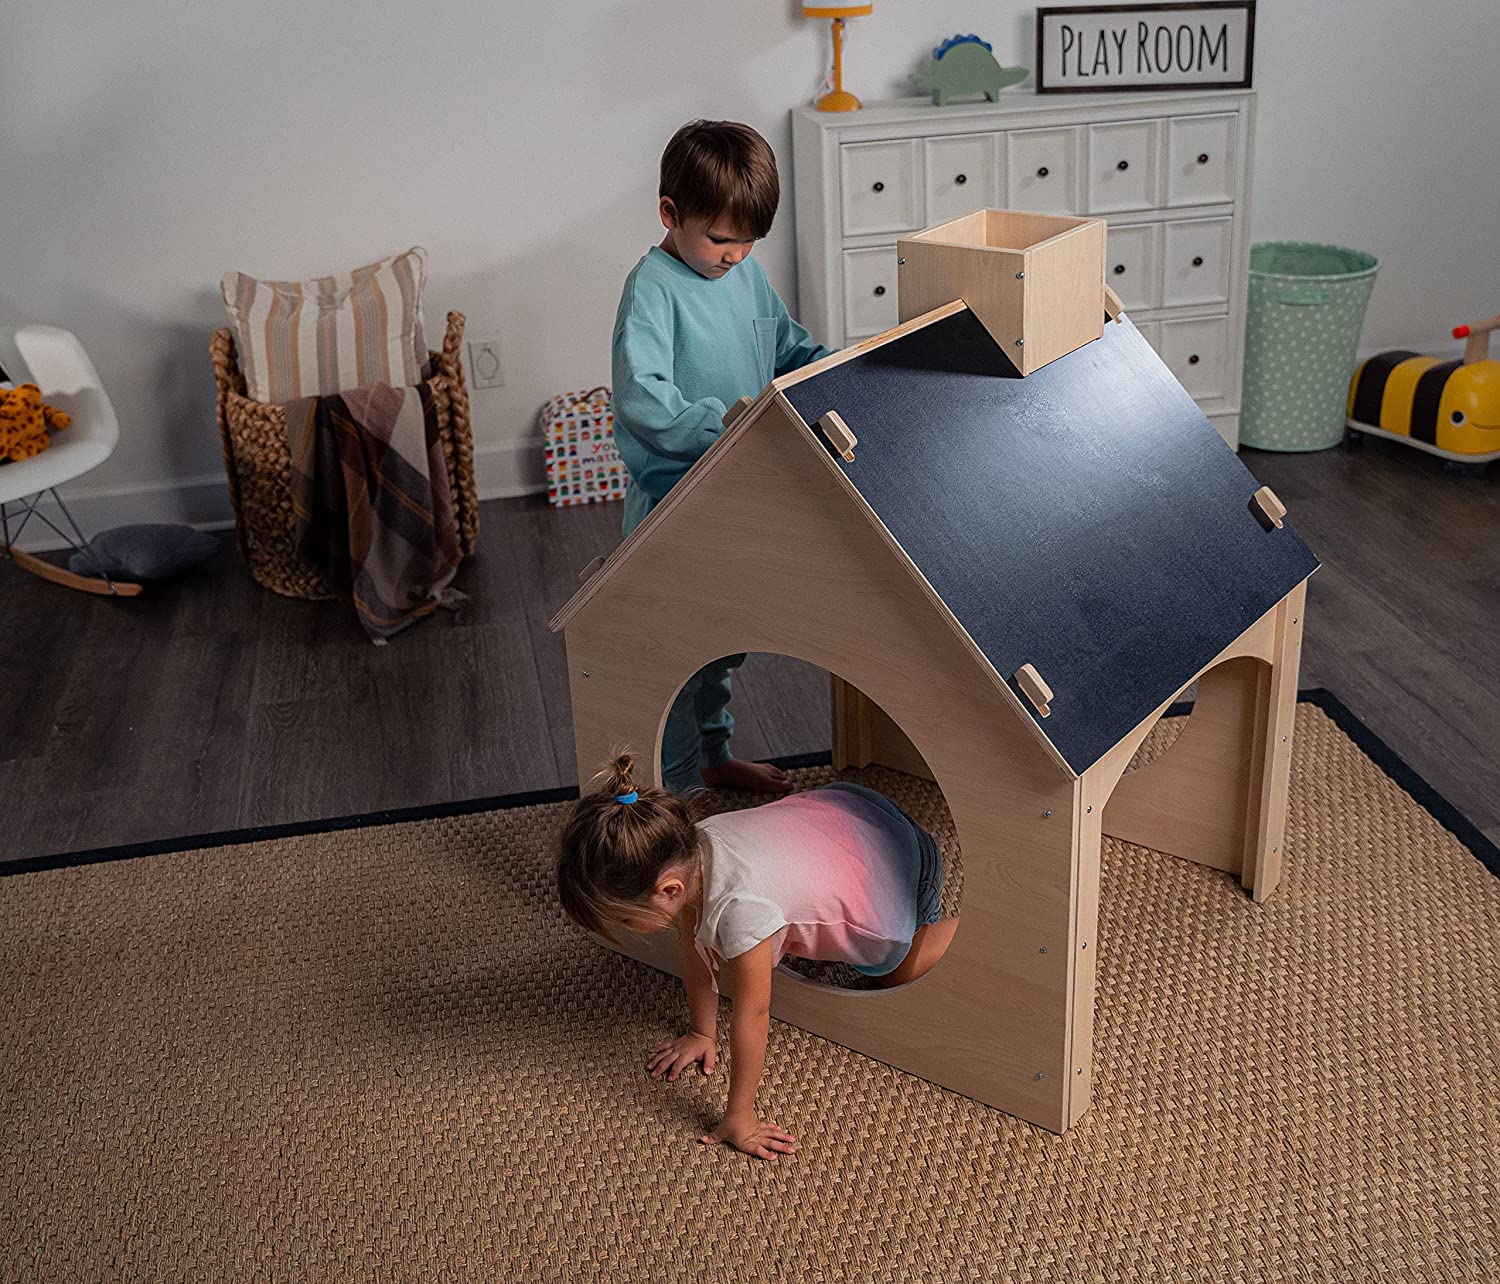 Children Playing Inside Evergreen - Avenlur's Children's Playhouse With Chalkboard - in Playroom